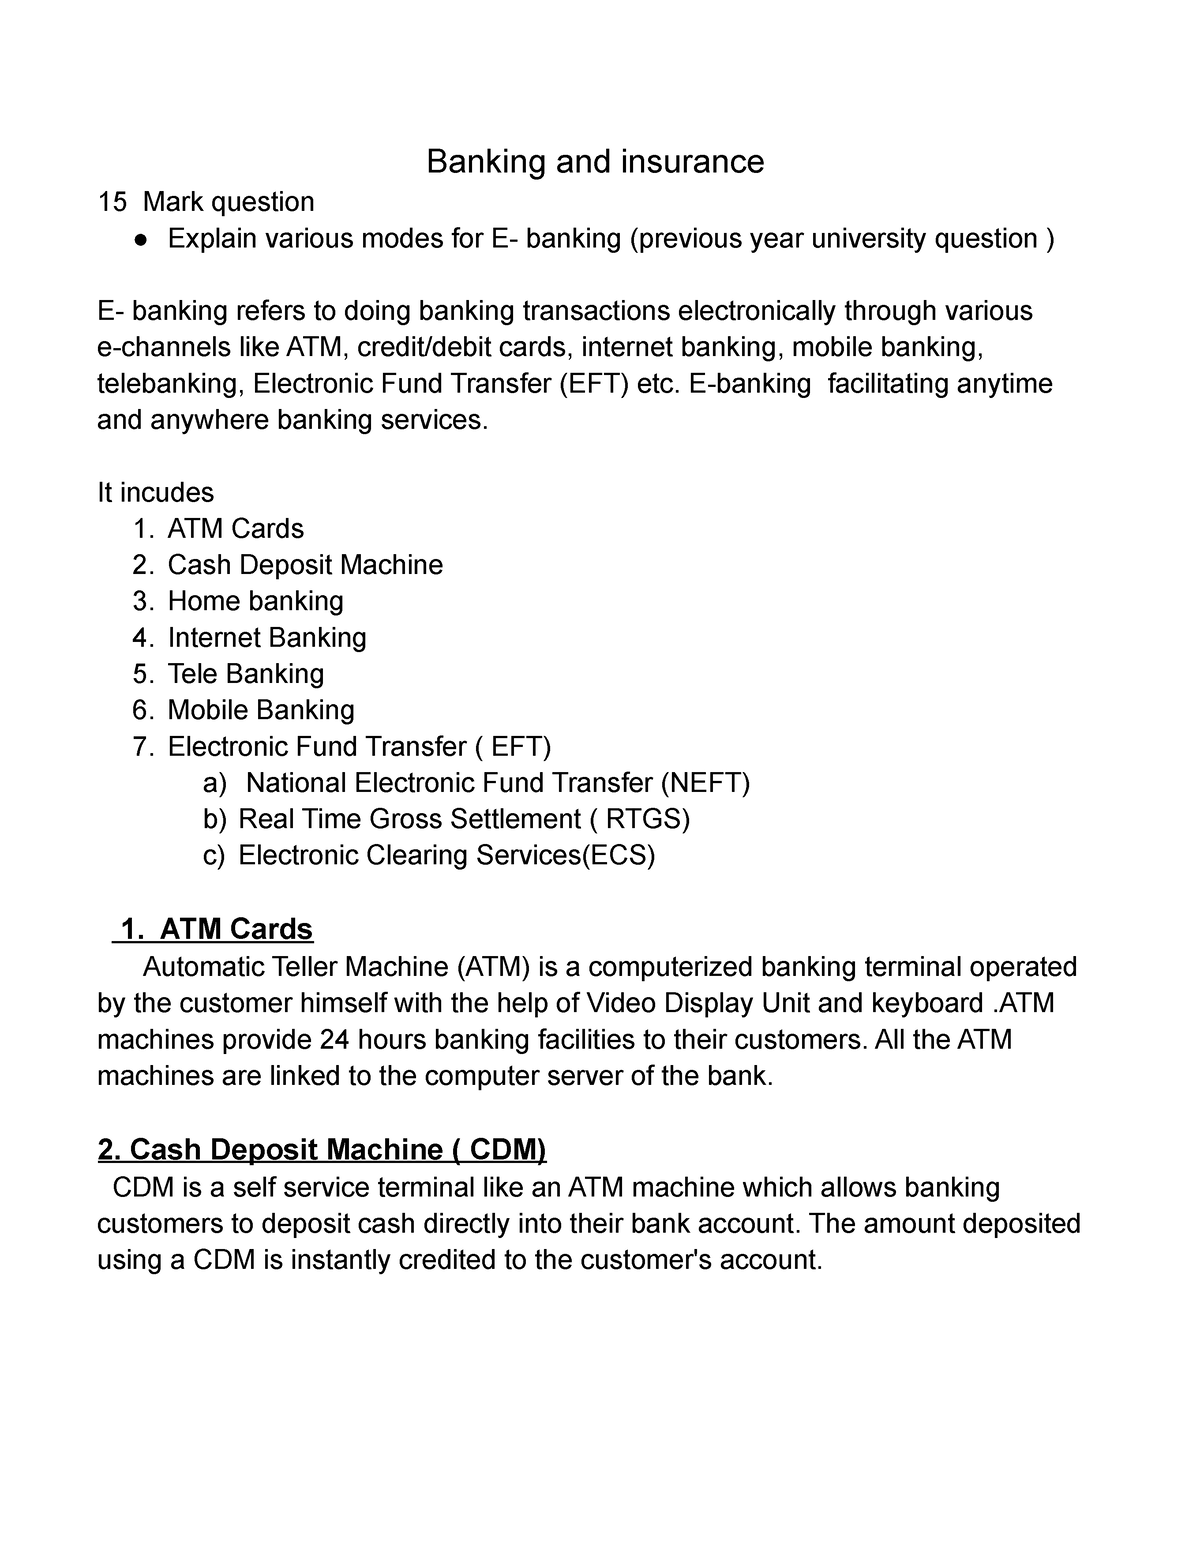 investment banking essay questions